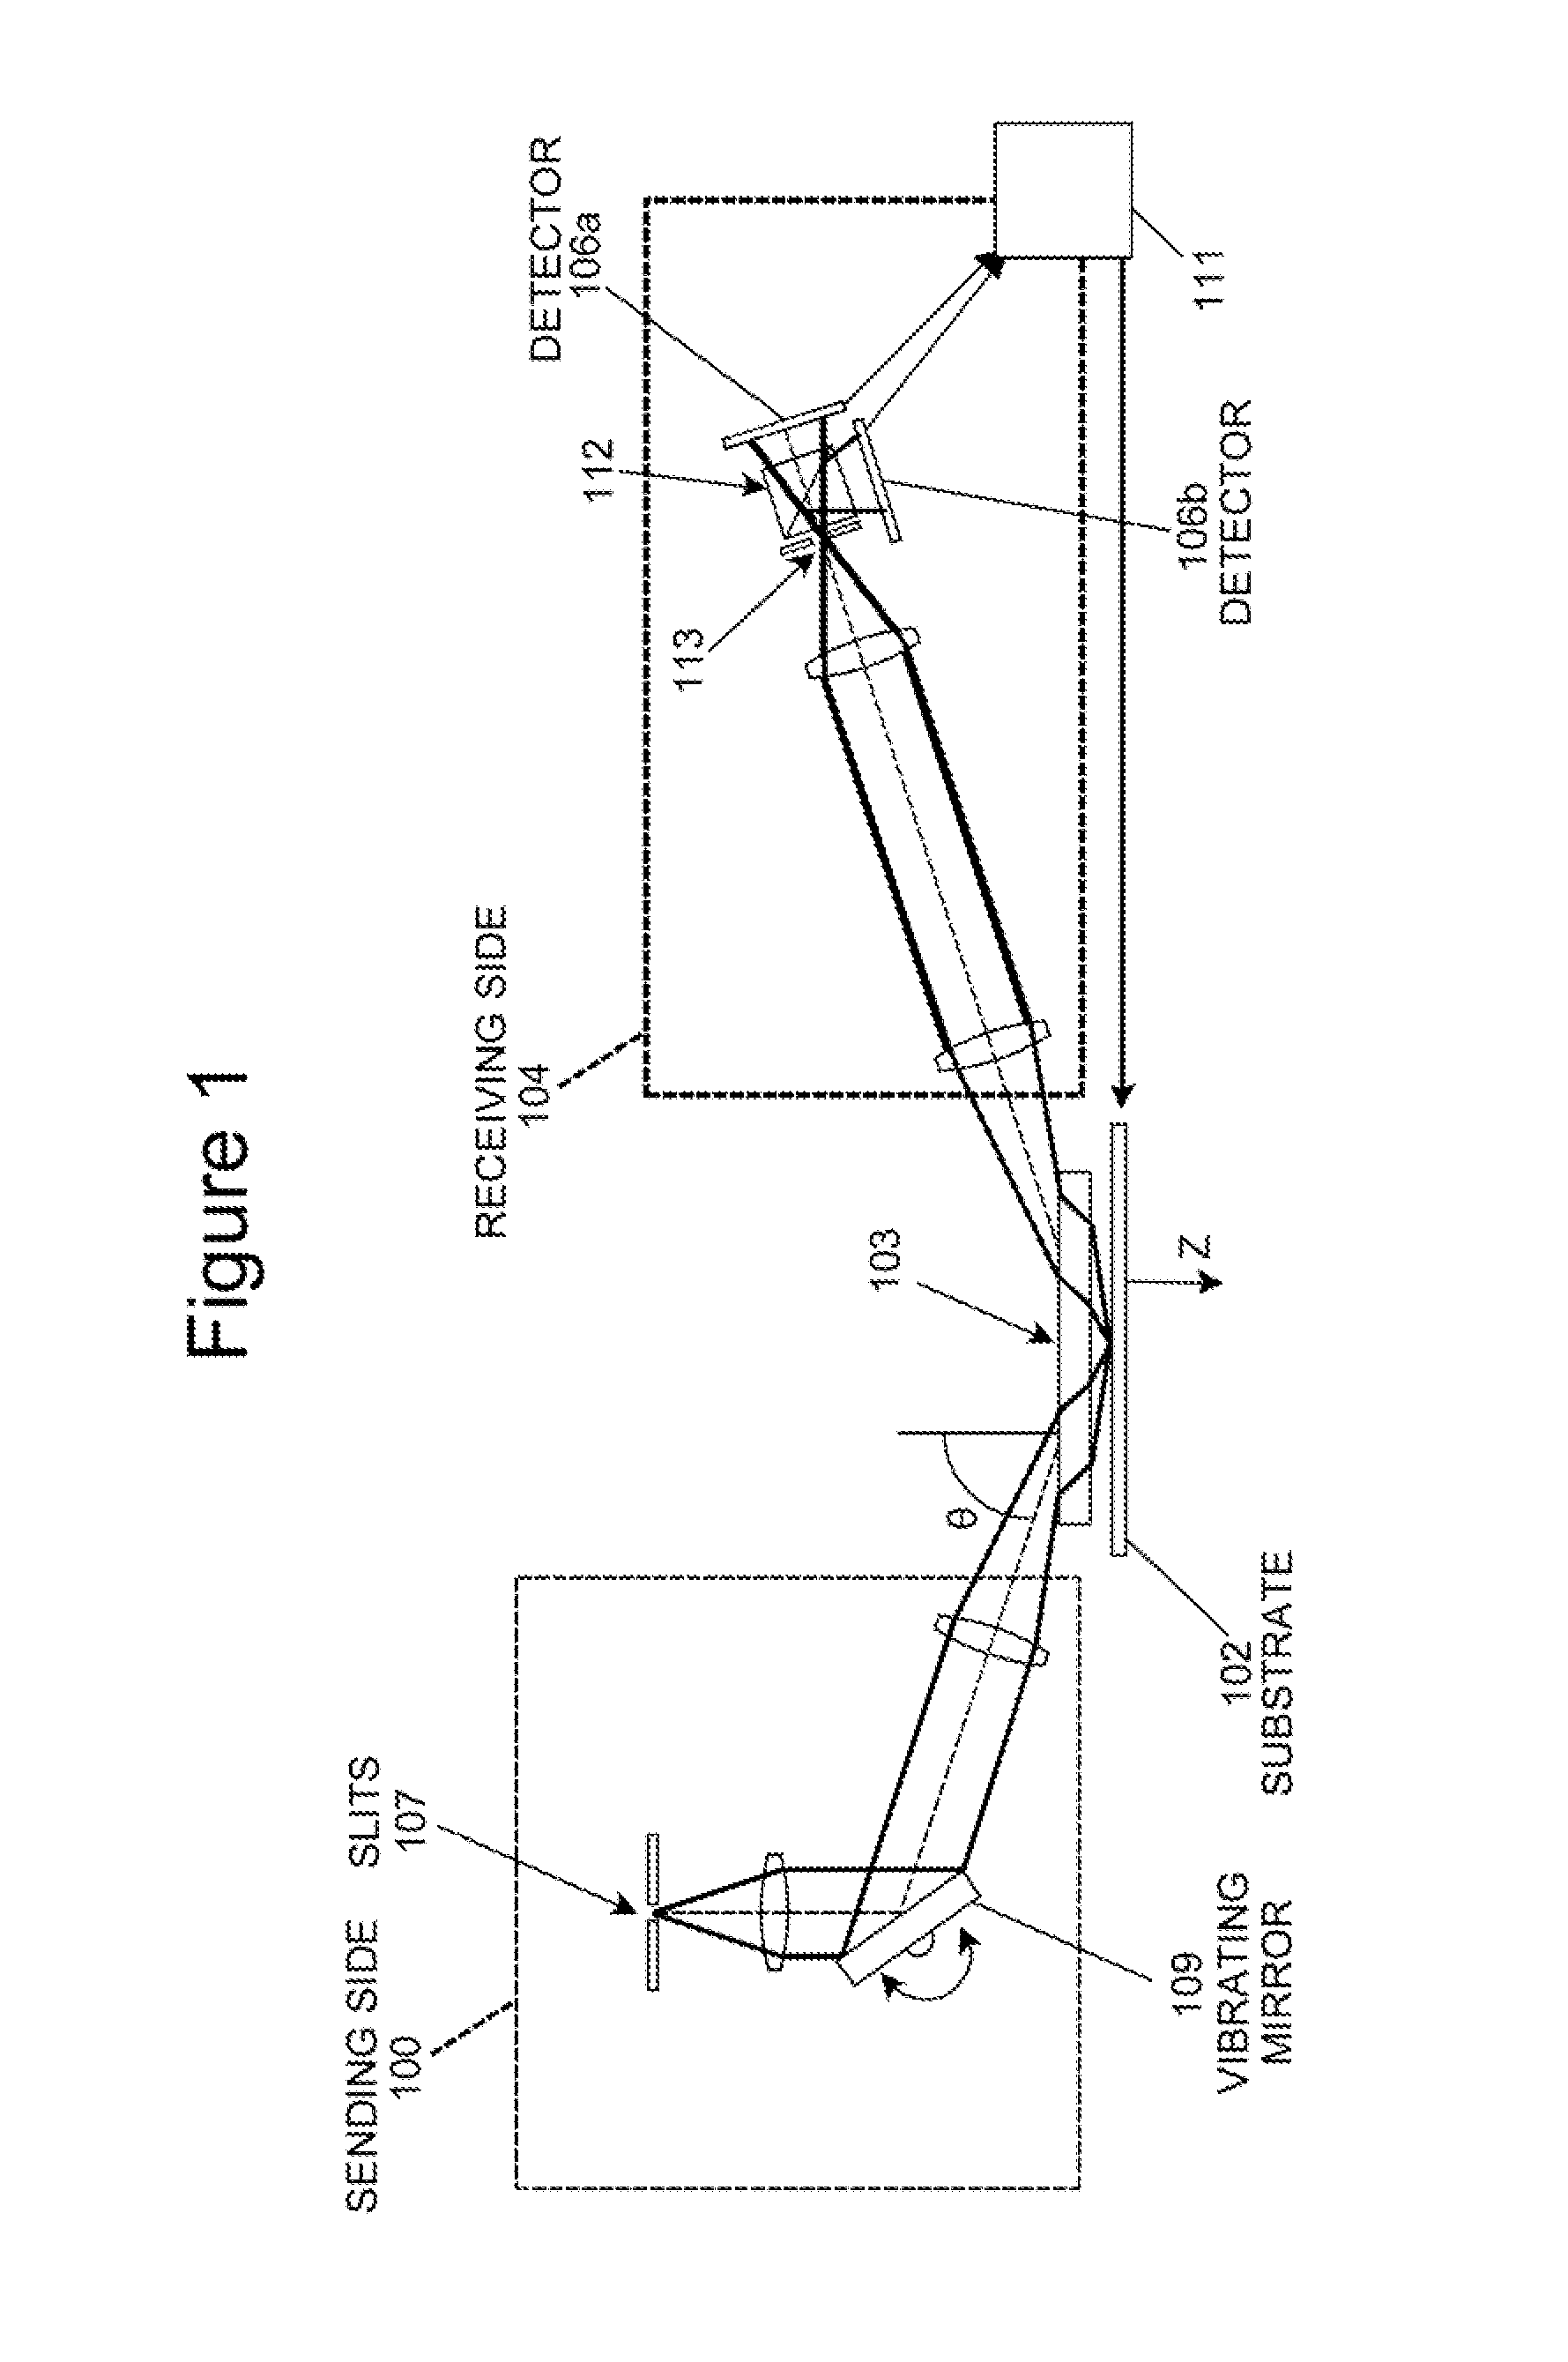 System and method for compensating instability in an autofocus system